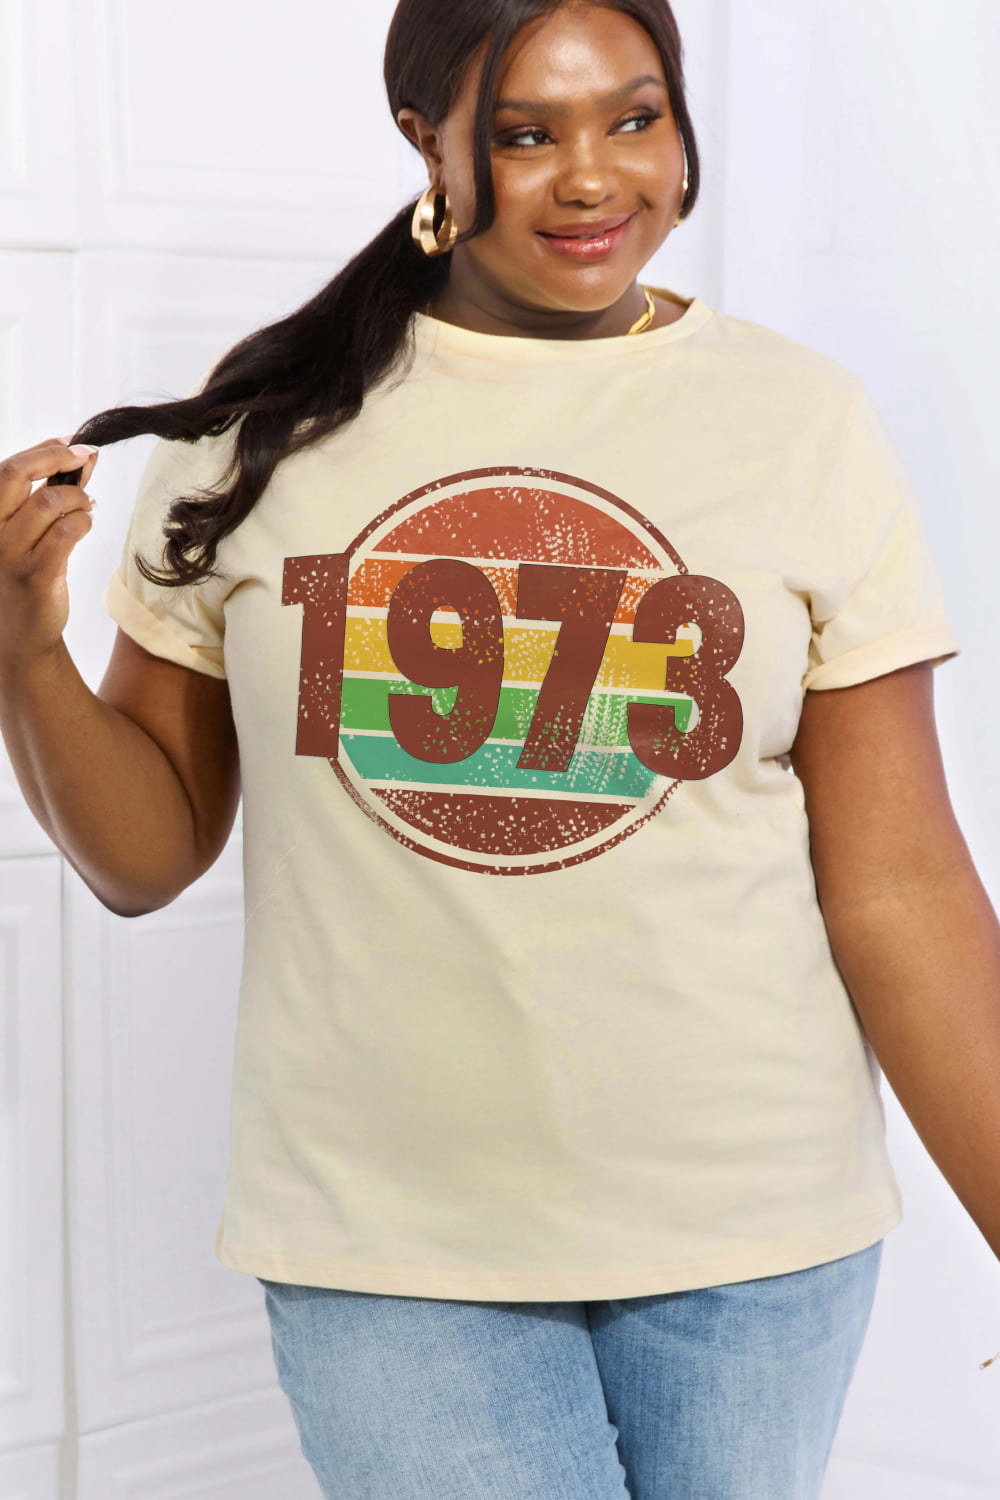 Simply Love Full Size 1973 Graphic Cotton Tee